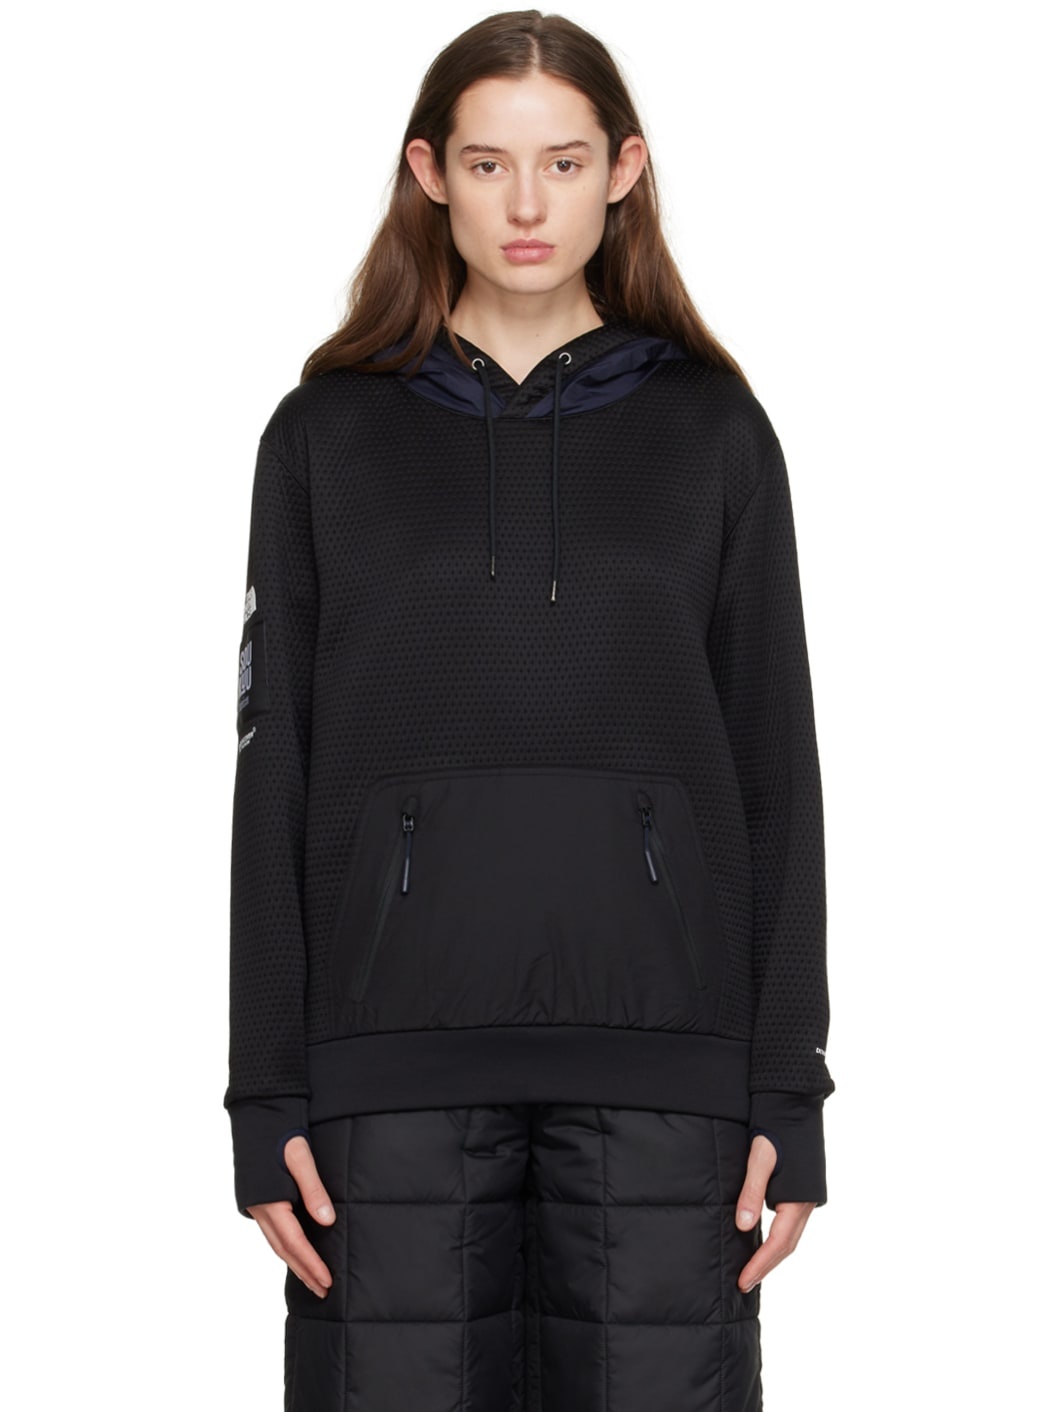 Black The North Face Edition Hoodie - 1